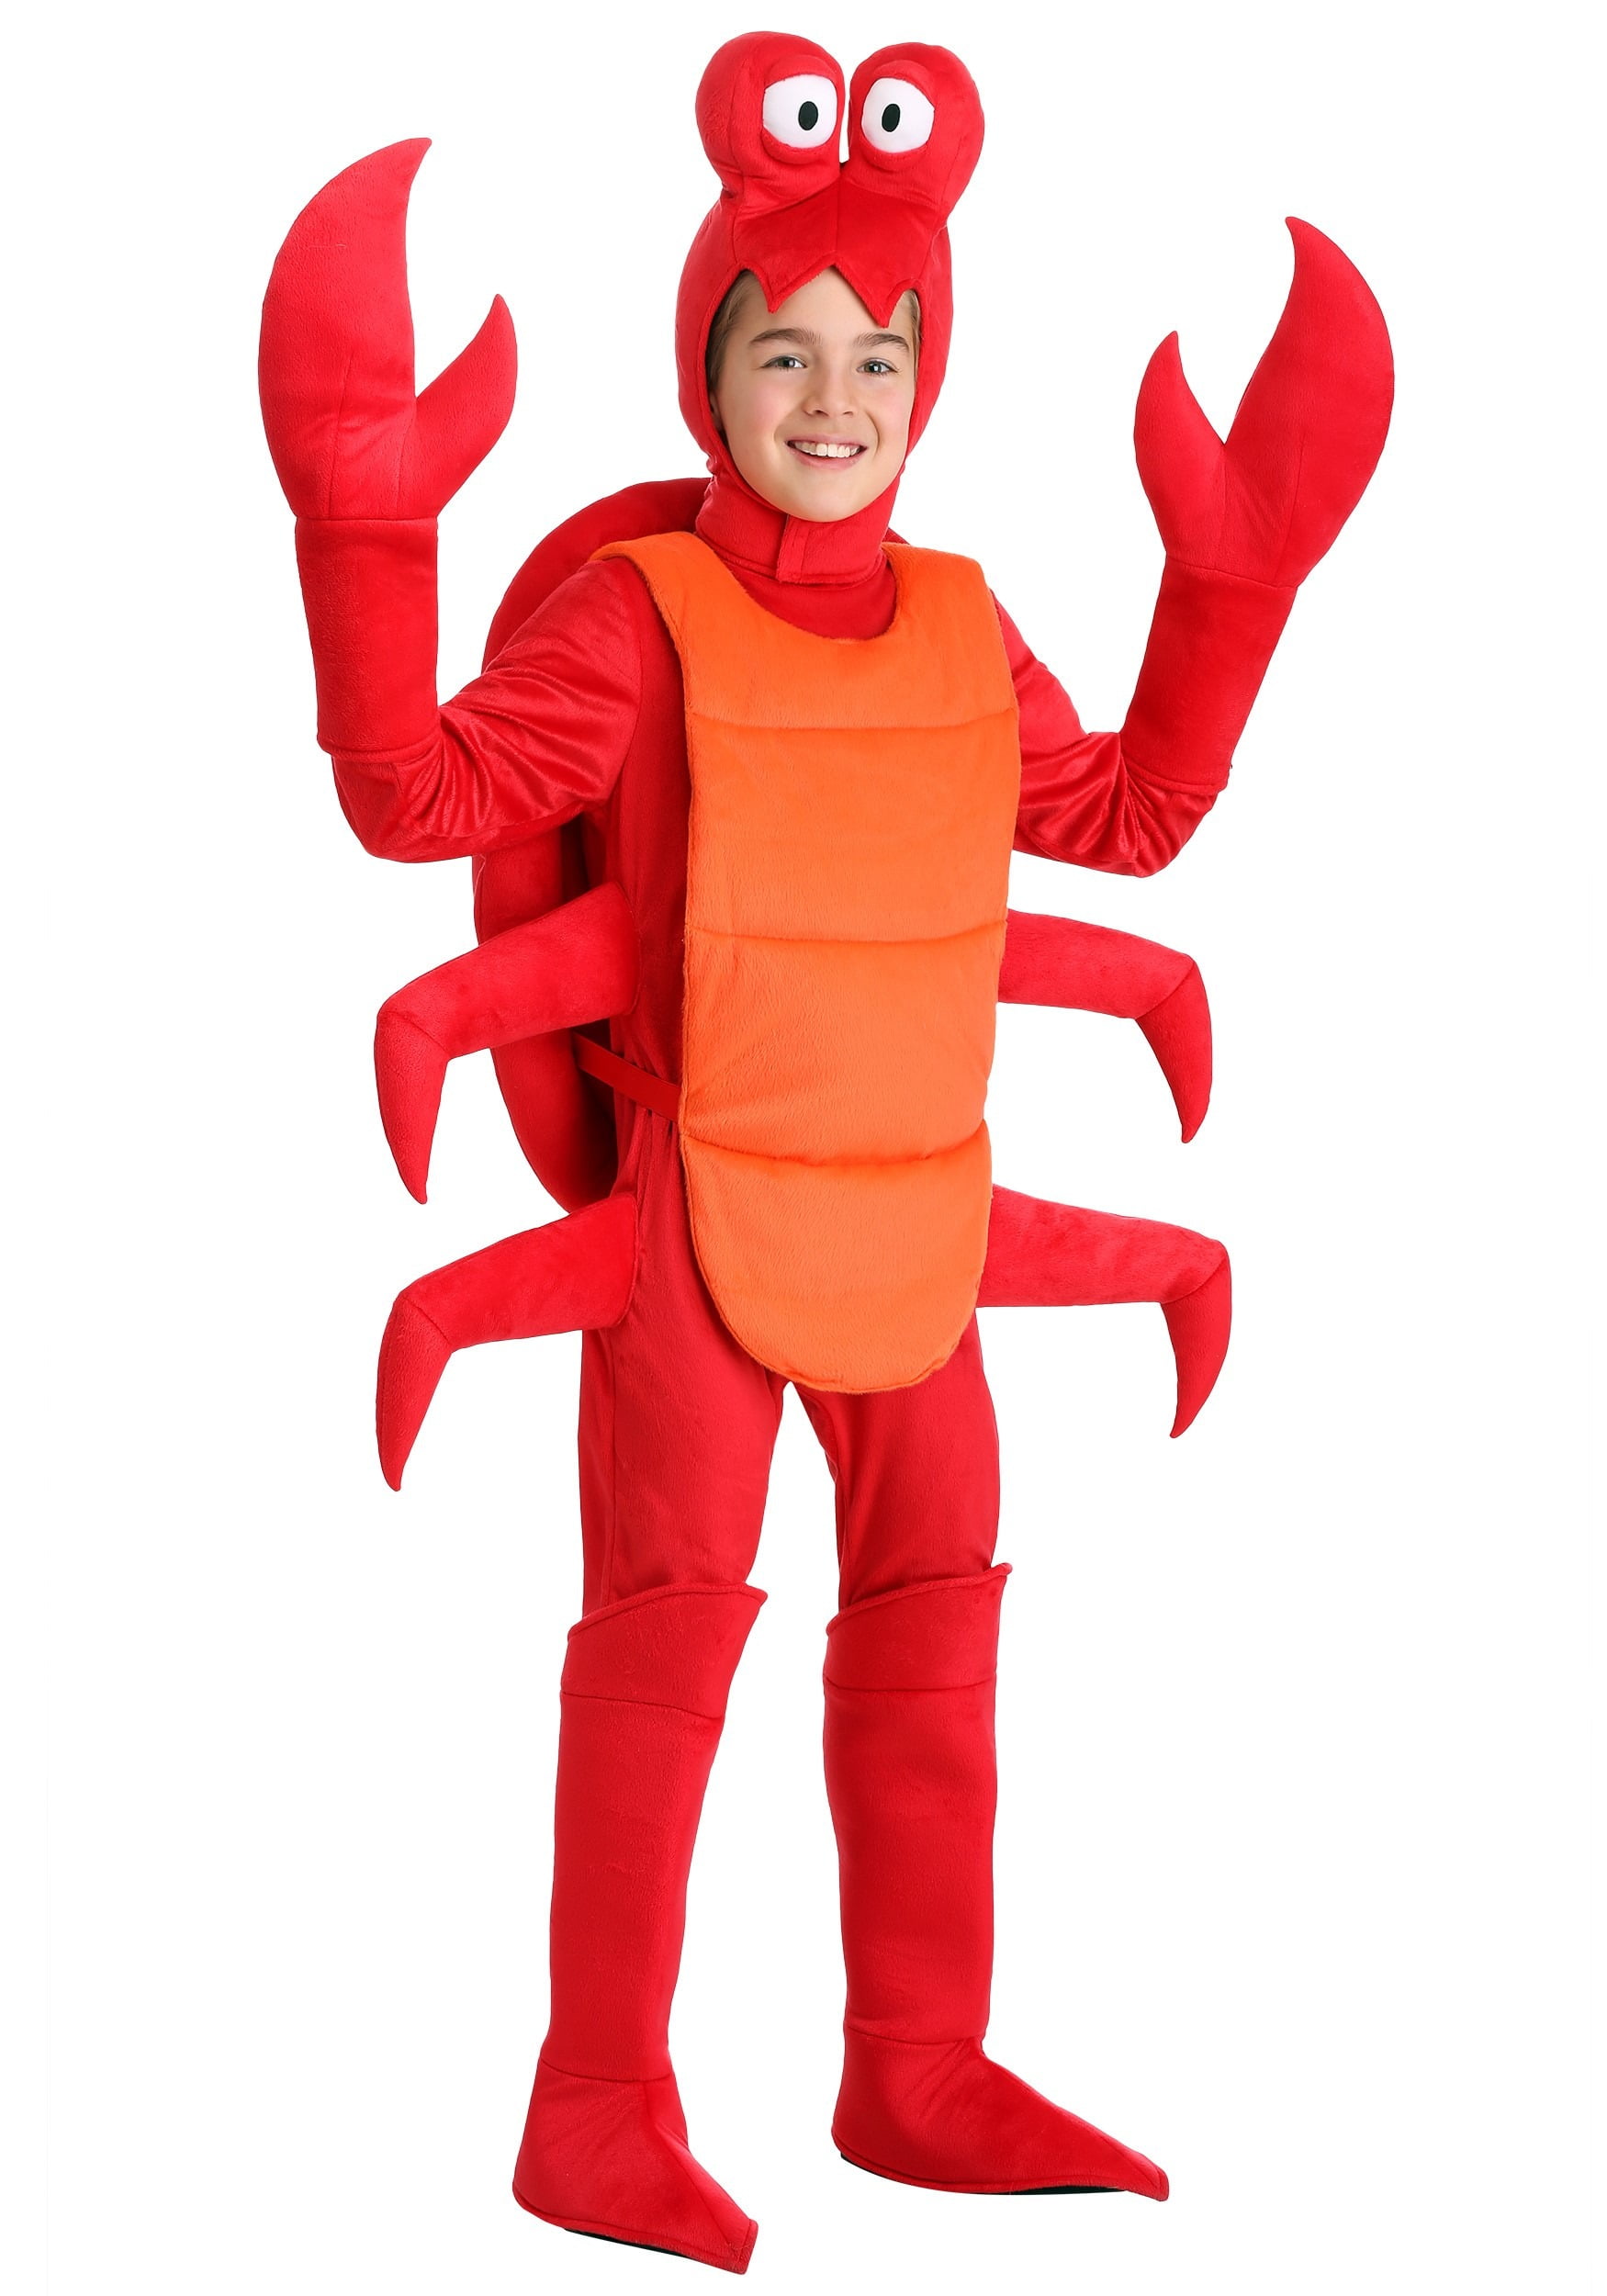 Halloween Costume Child's Love - Cute Baby In Crab Outfit Crab costume | ...